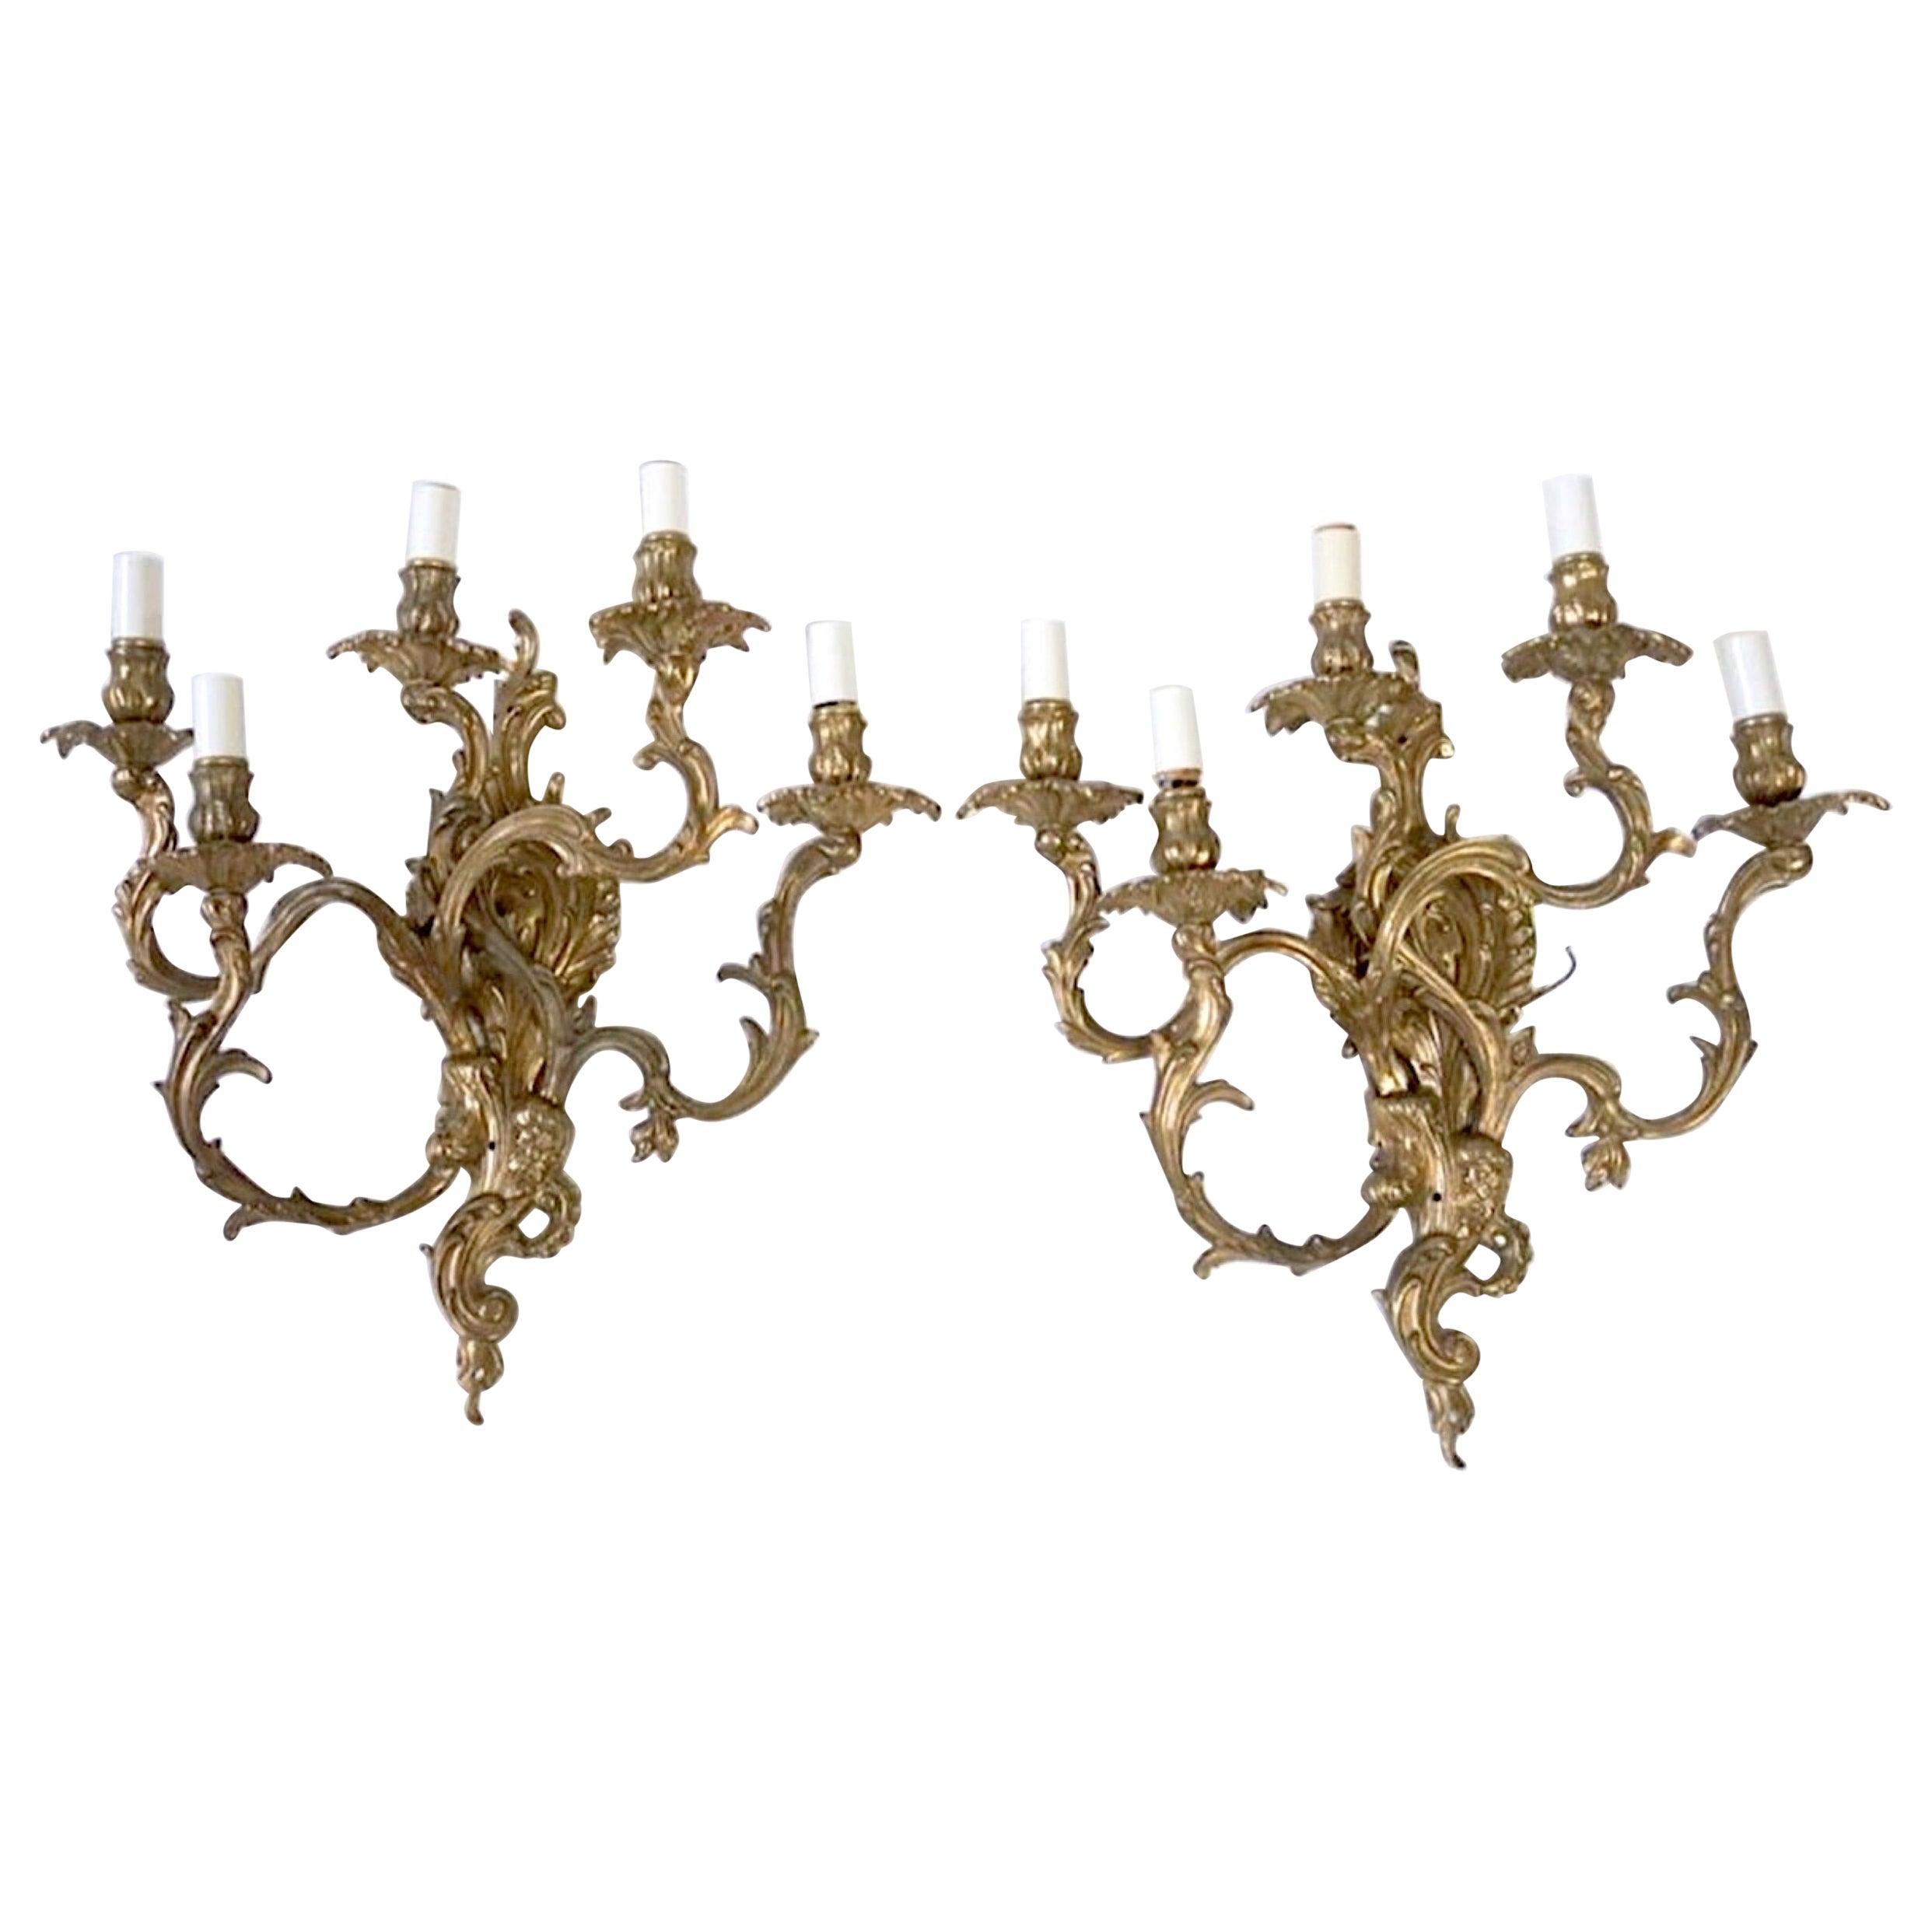 19th Century French Rococo 5 Arm Wired Wall Sconces - a Pair